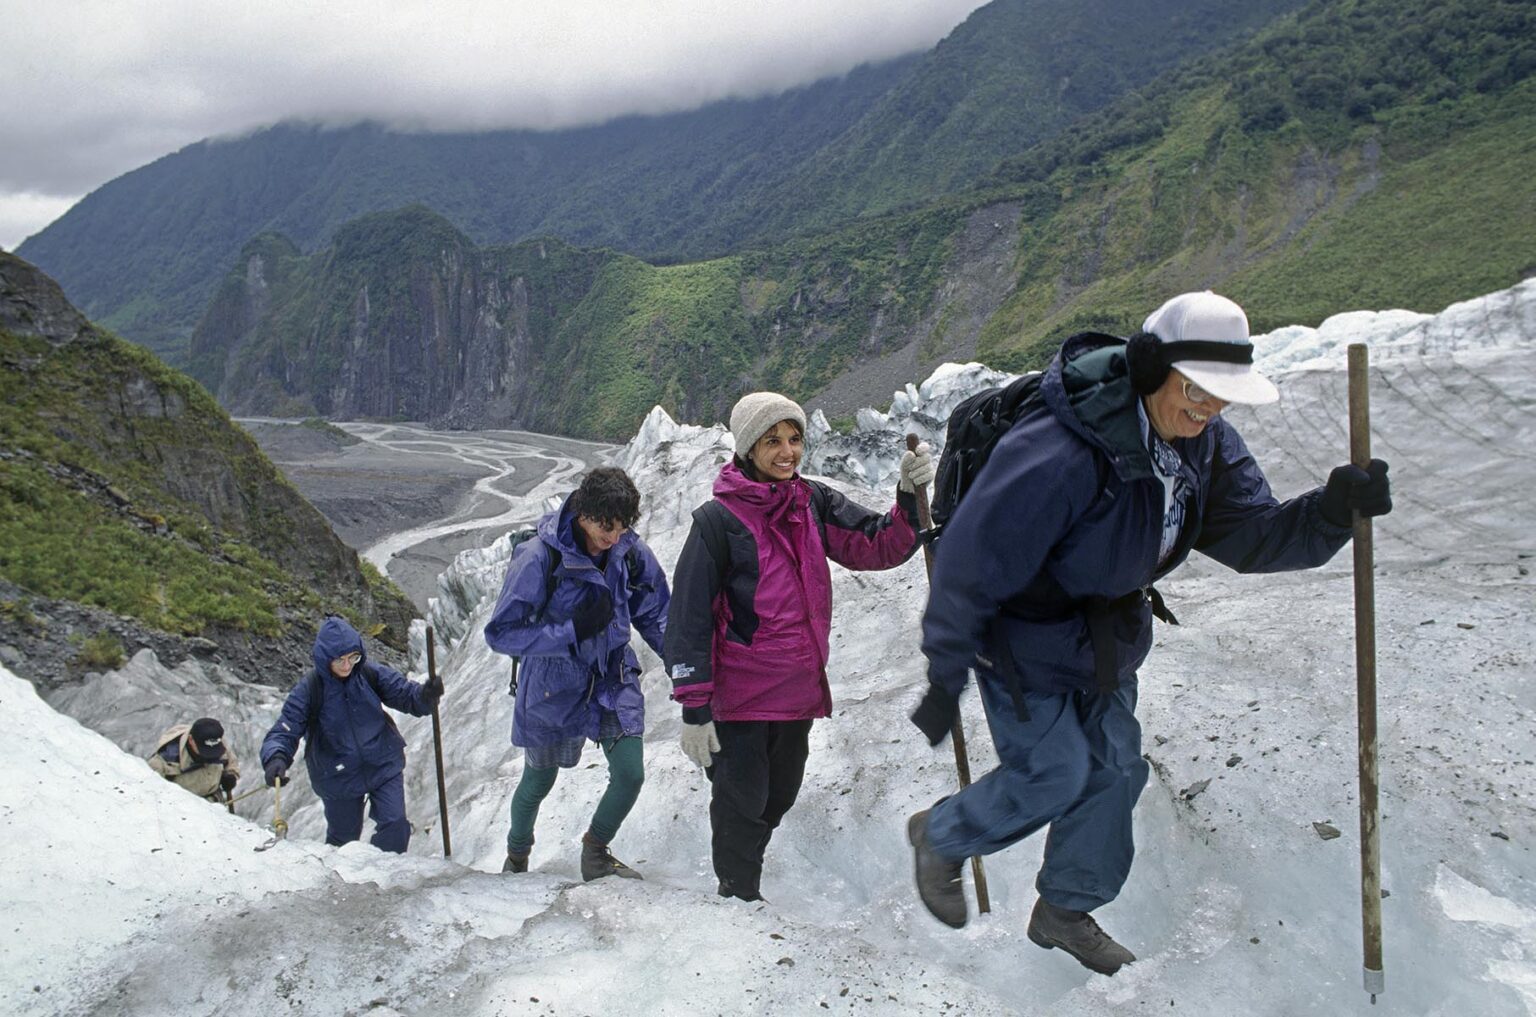 Climbing un carved ice steps on the FOX GLACIER, one of the worlds few advancing glaciers - SOUTH ISLAND NEW ZEALAND